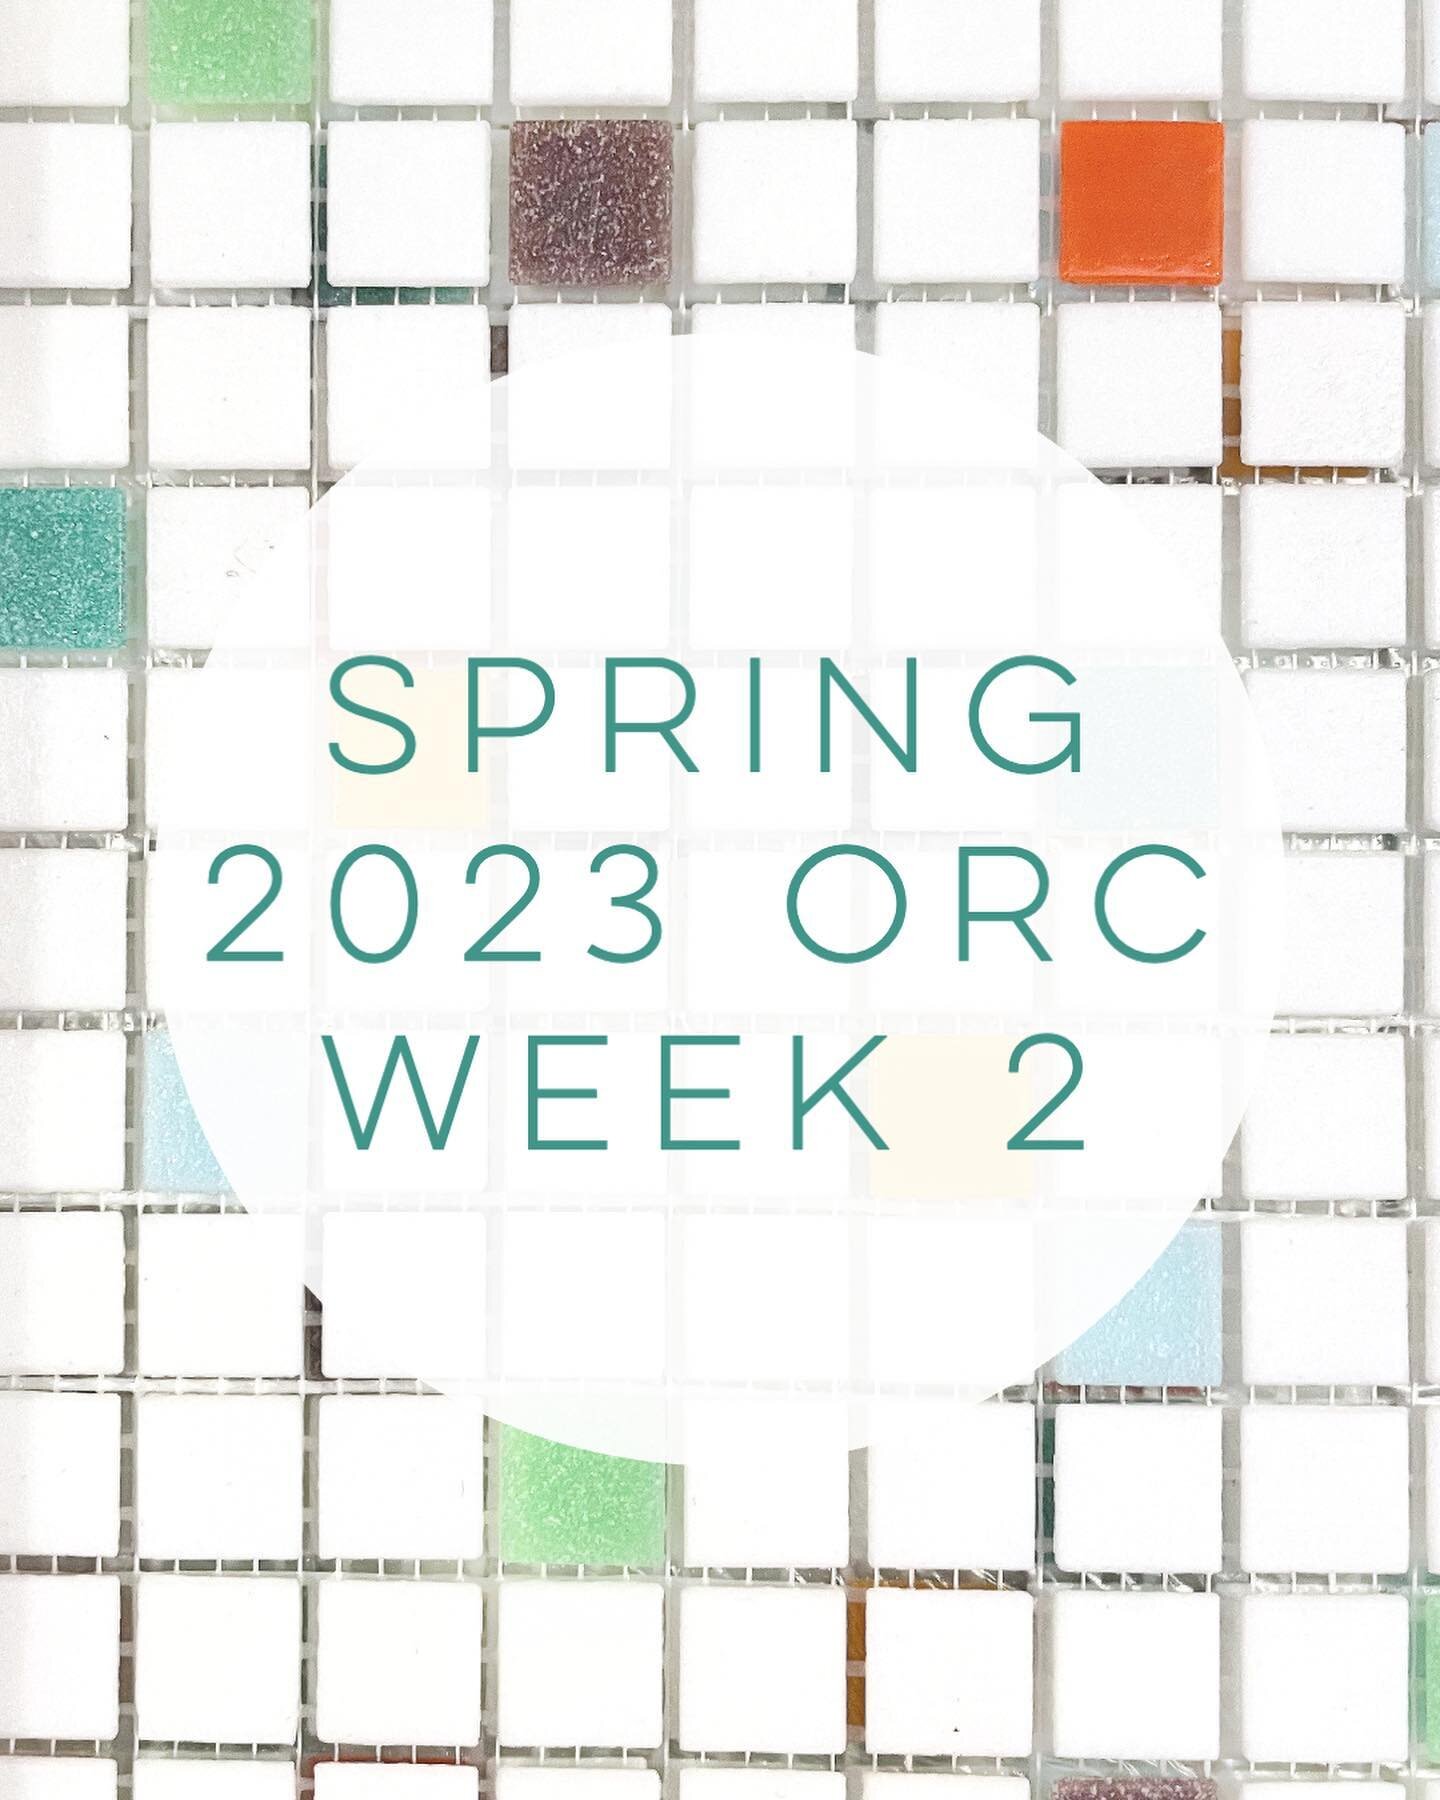 The Week 2 One Room Challenge update is live! Swipe for a peek and then pop over to the blog for the whole update. Link in my profile or in my stories! 

Also I created a highlight of all of the ORC bathroom projects. If you have an upcoming bathroom